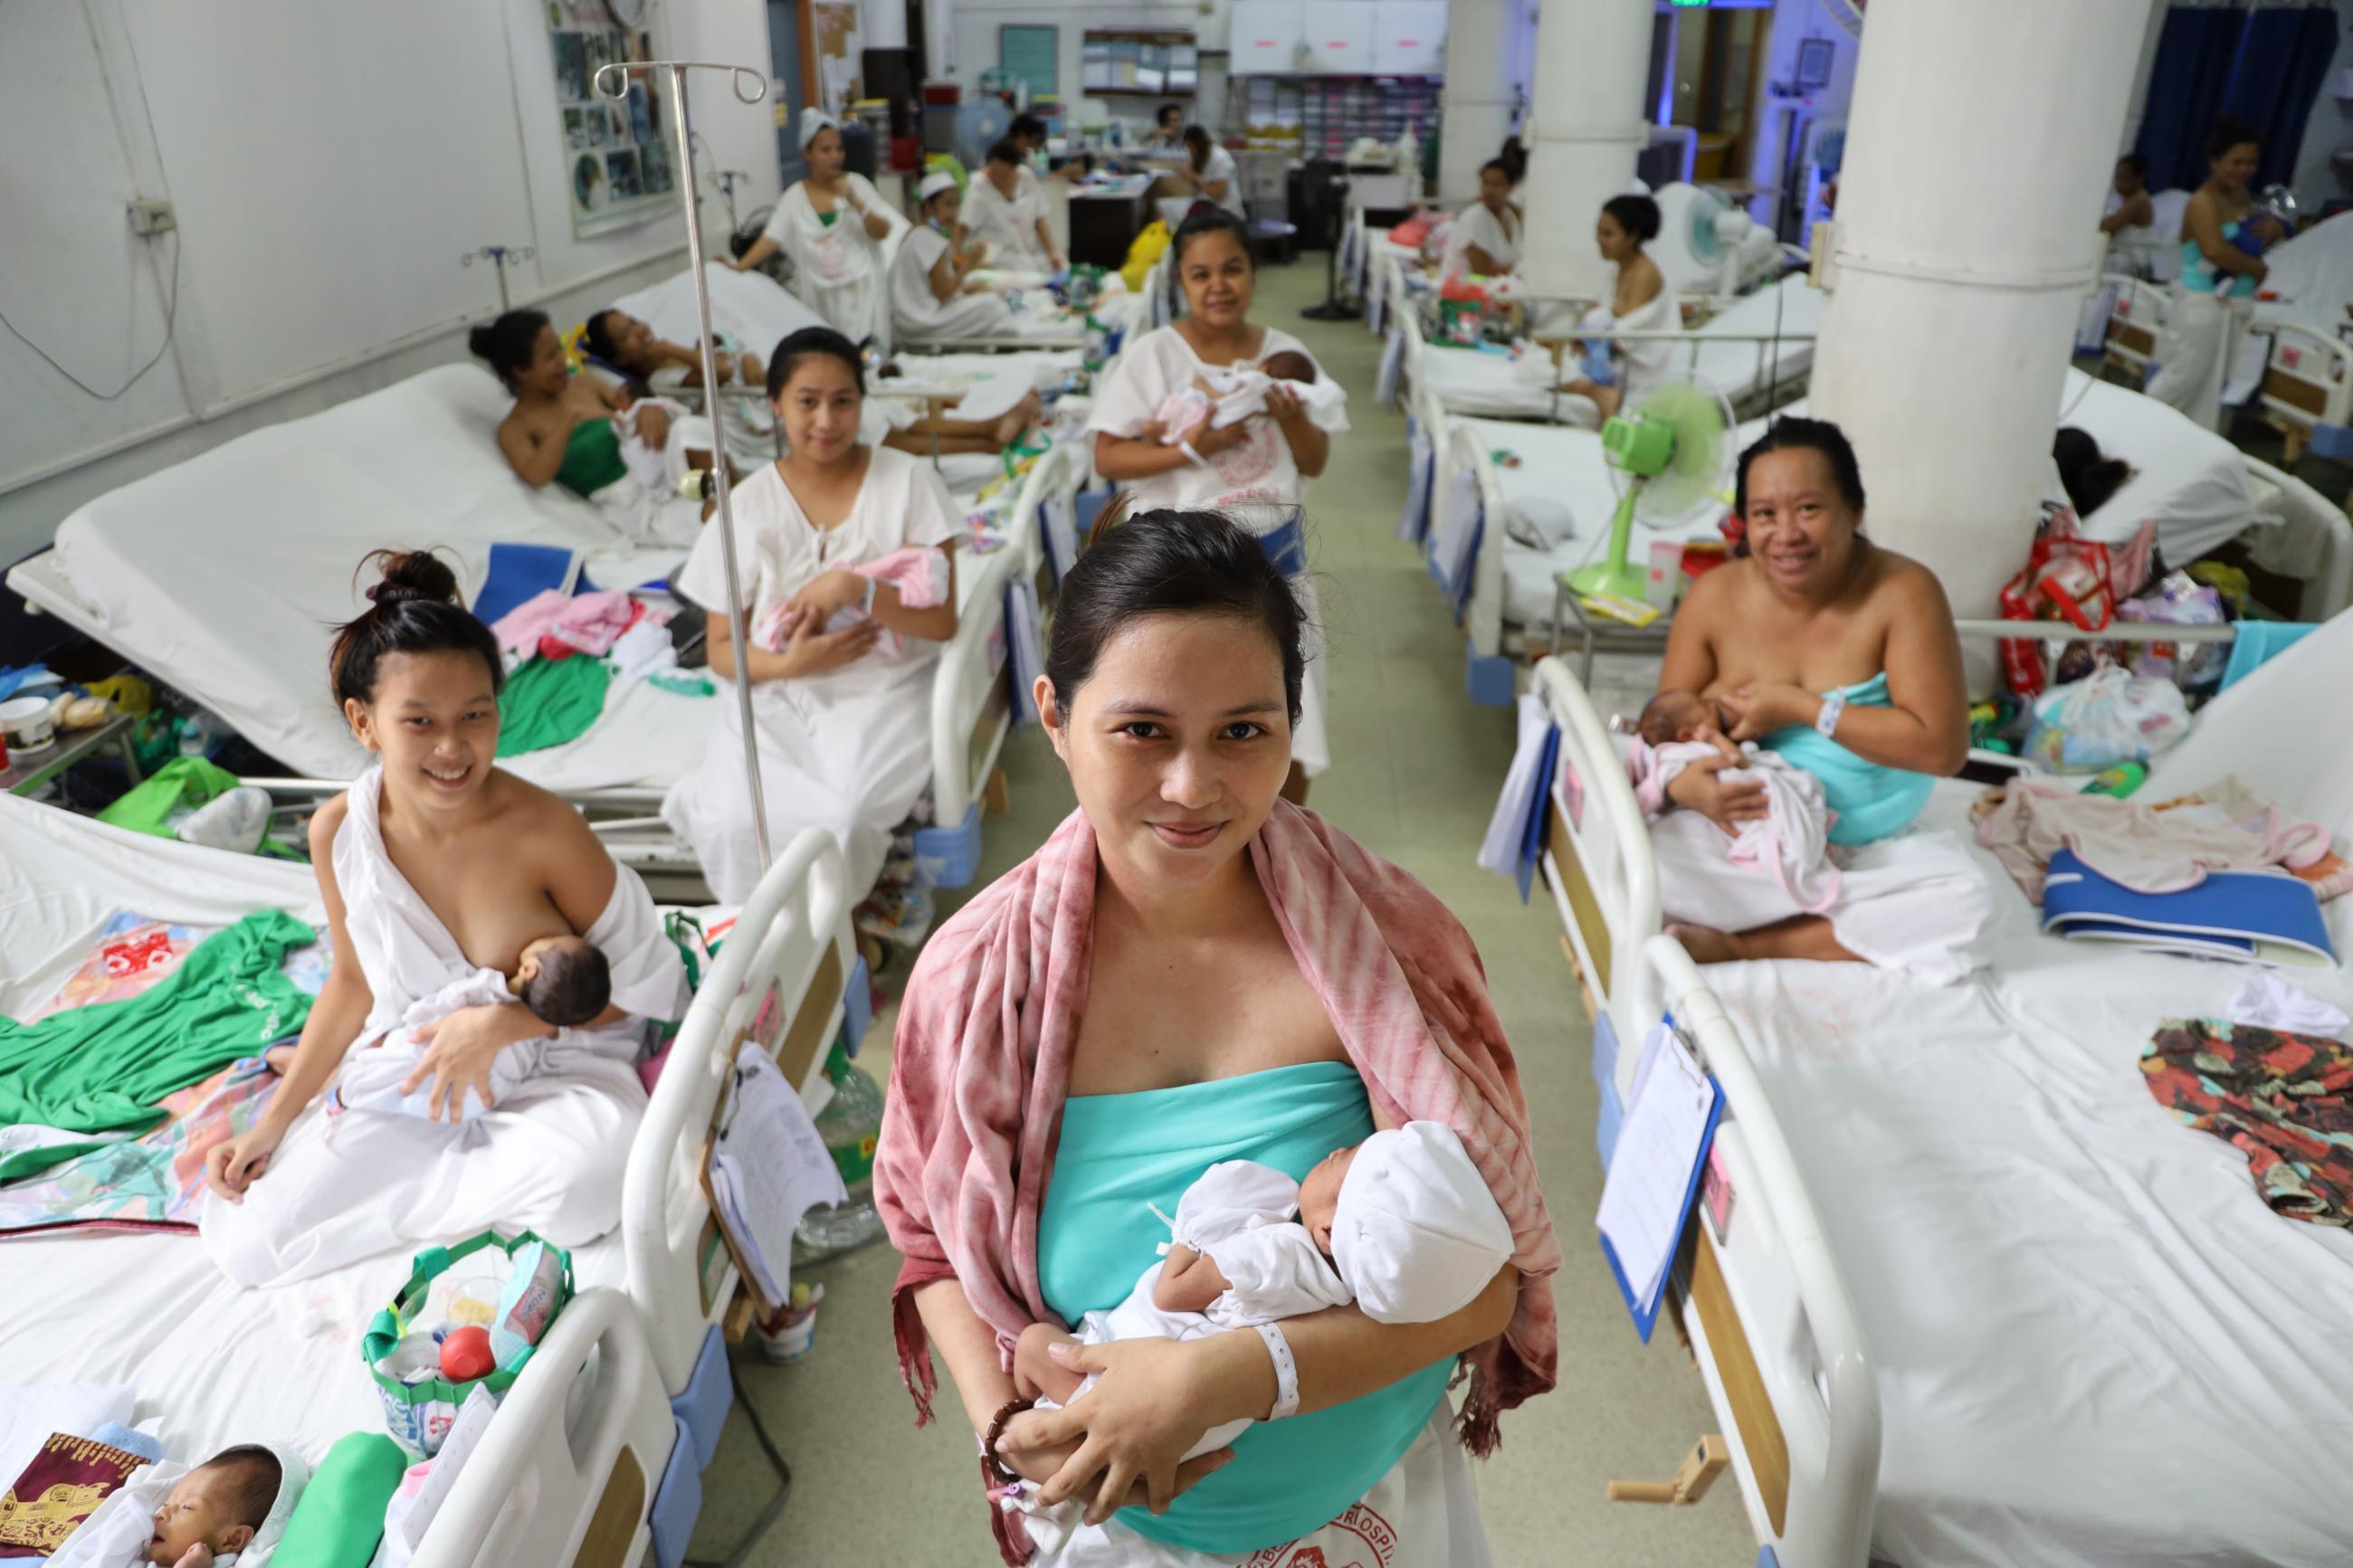 A woman in a turquoise shirt and pink shawl smiles in the center of the photograph holding her newborn infant. On either side of her are rows of hospital beds, upon which sit other women nursing infants in a maternity ward in the Philippines.